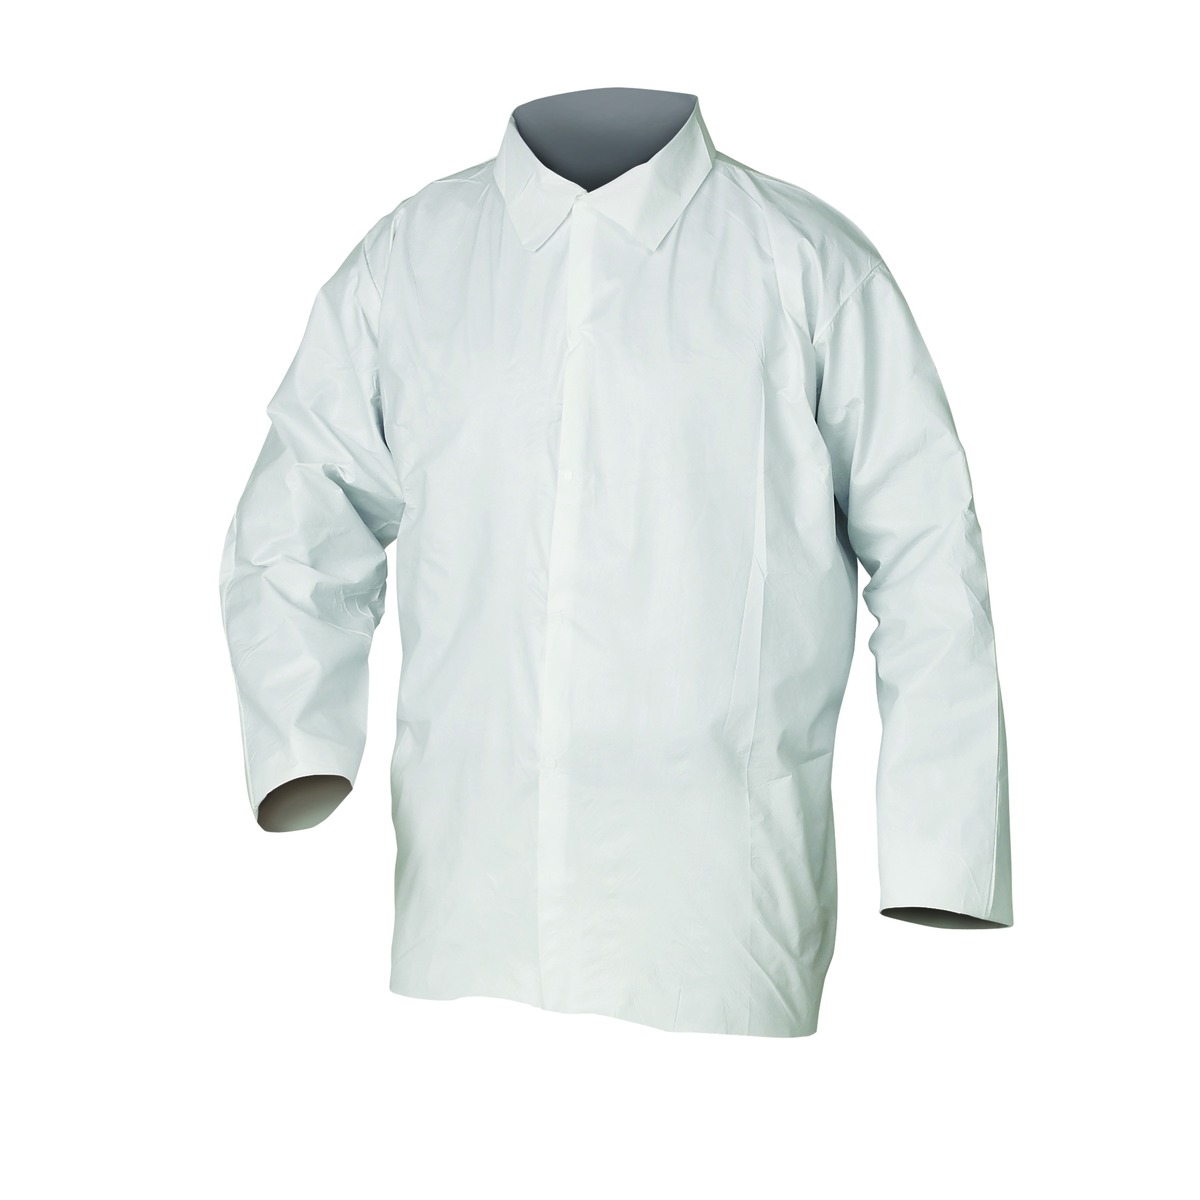 Kimberly-Clark Professional™ 2X White KleenGuard™ A20 SMMMS Disposable Shirt (Availability restrictions apply.)